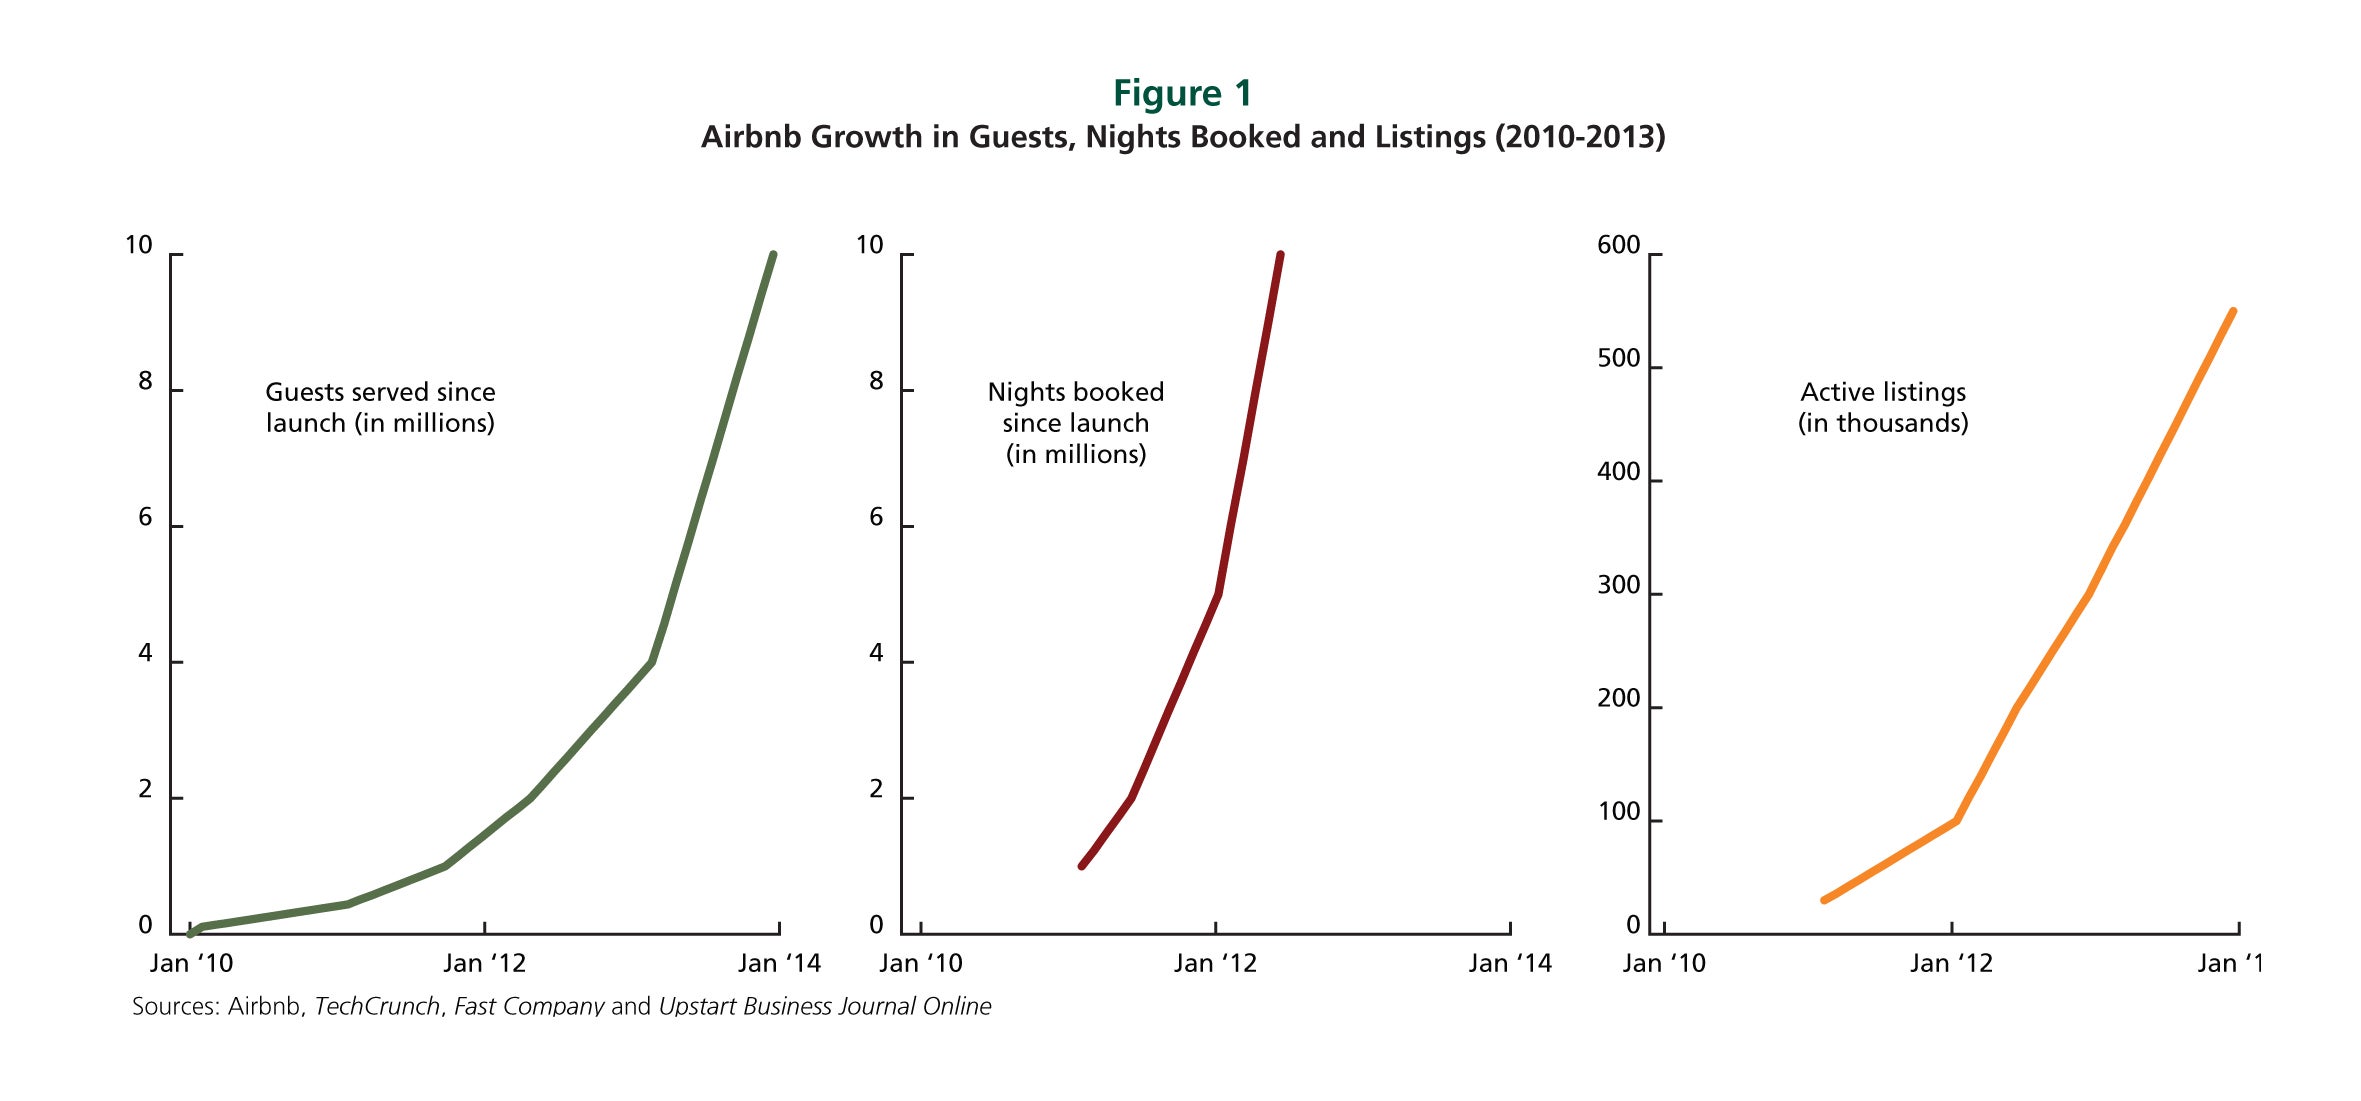 Airbnb Growth in Guests, Night Booked and Listings